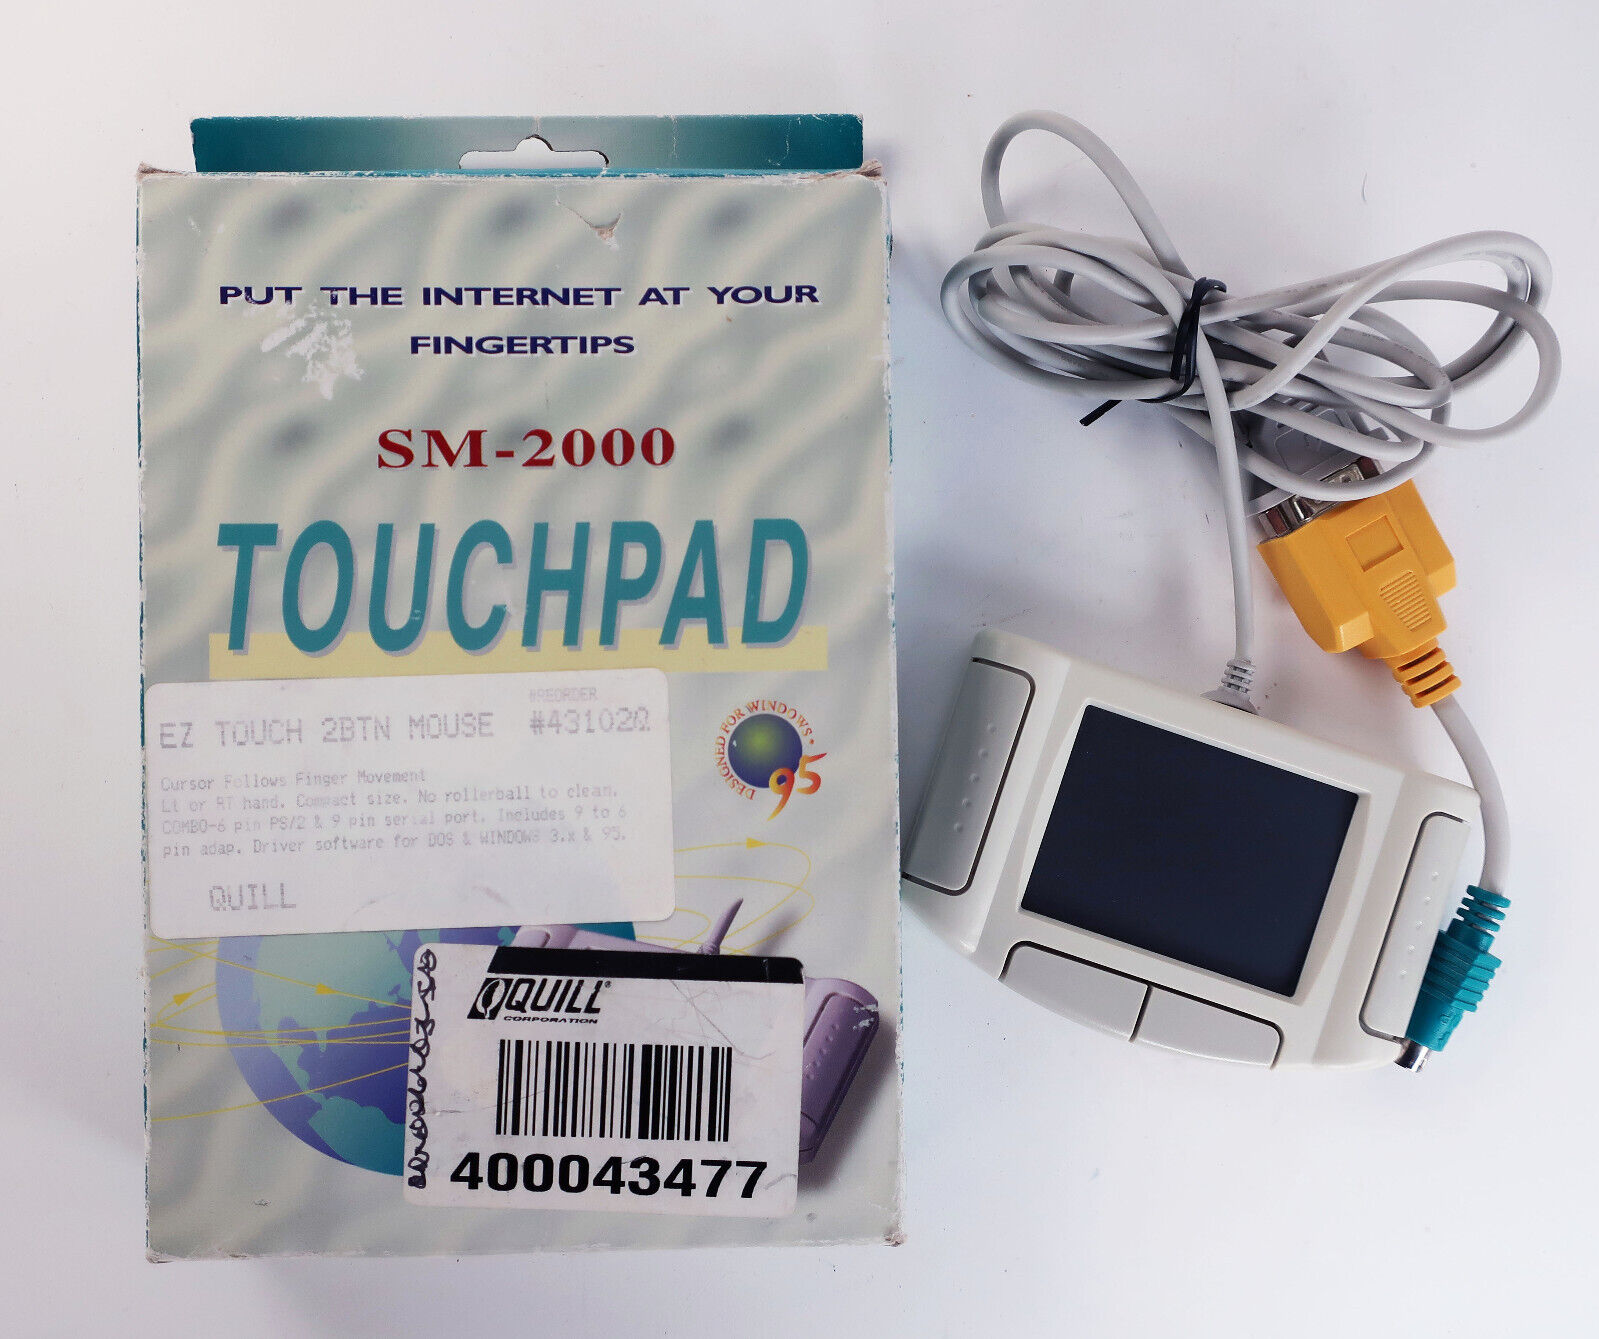 Serial Mouse Touch Pad PC Concepts Sm-2000 486 386 Vintage w/Box